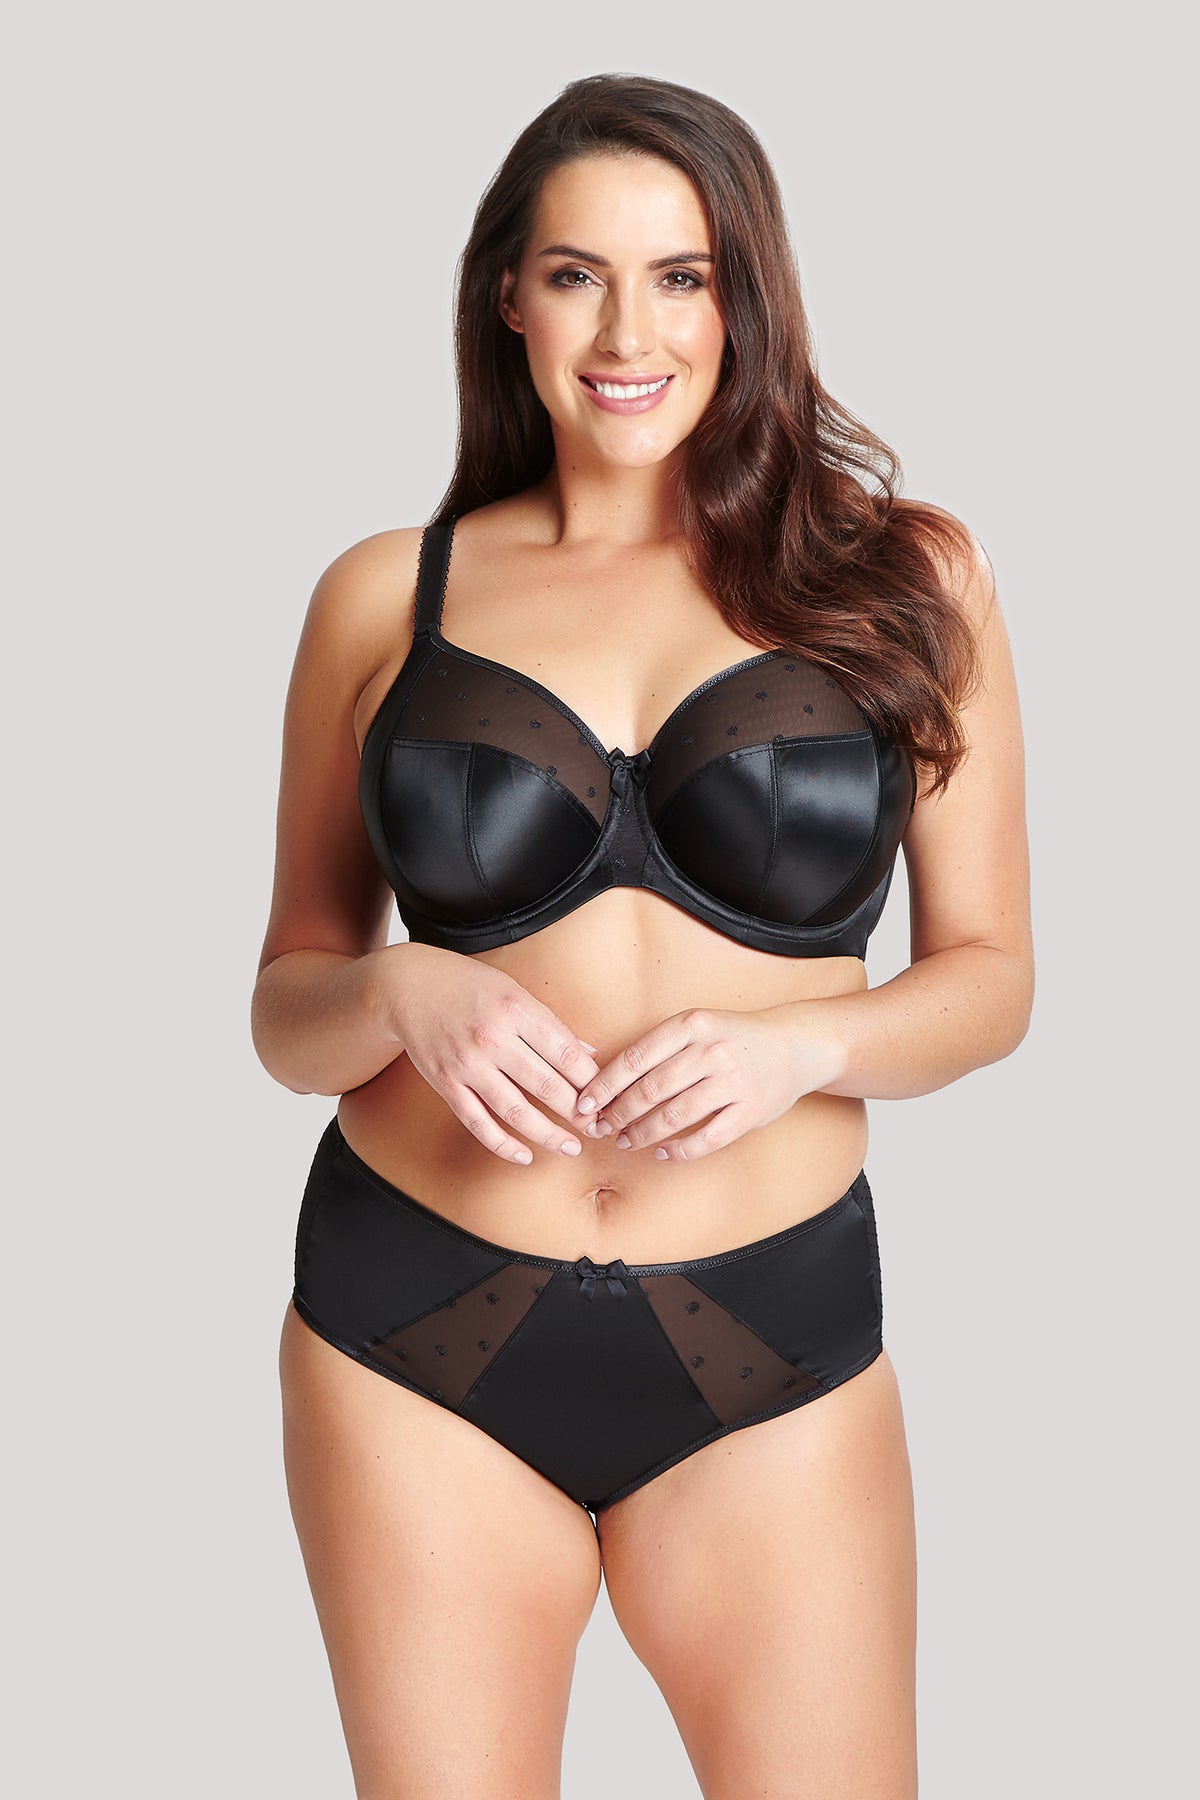 Panache Candi Full Cup Non Padded Wired Bra and Maxi Briefs Black